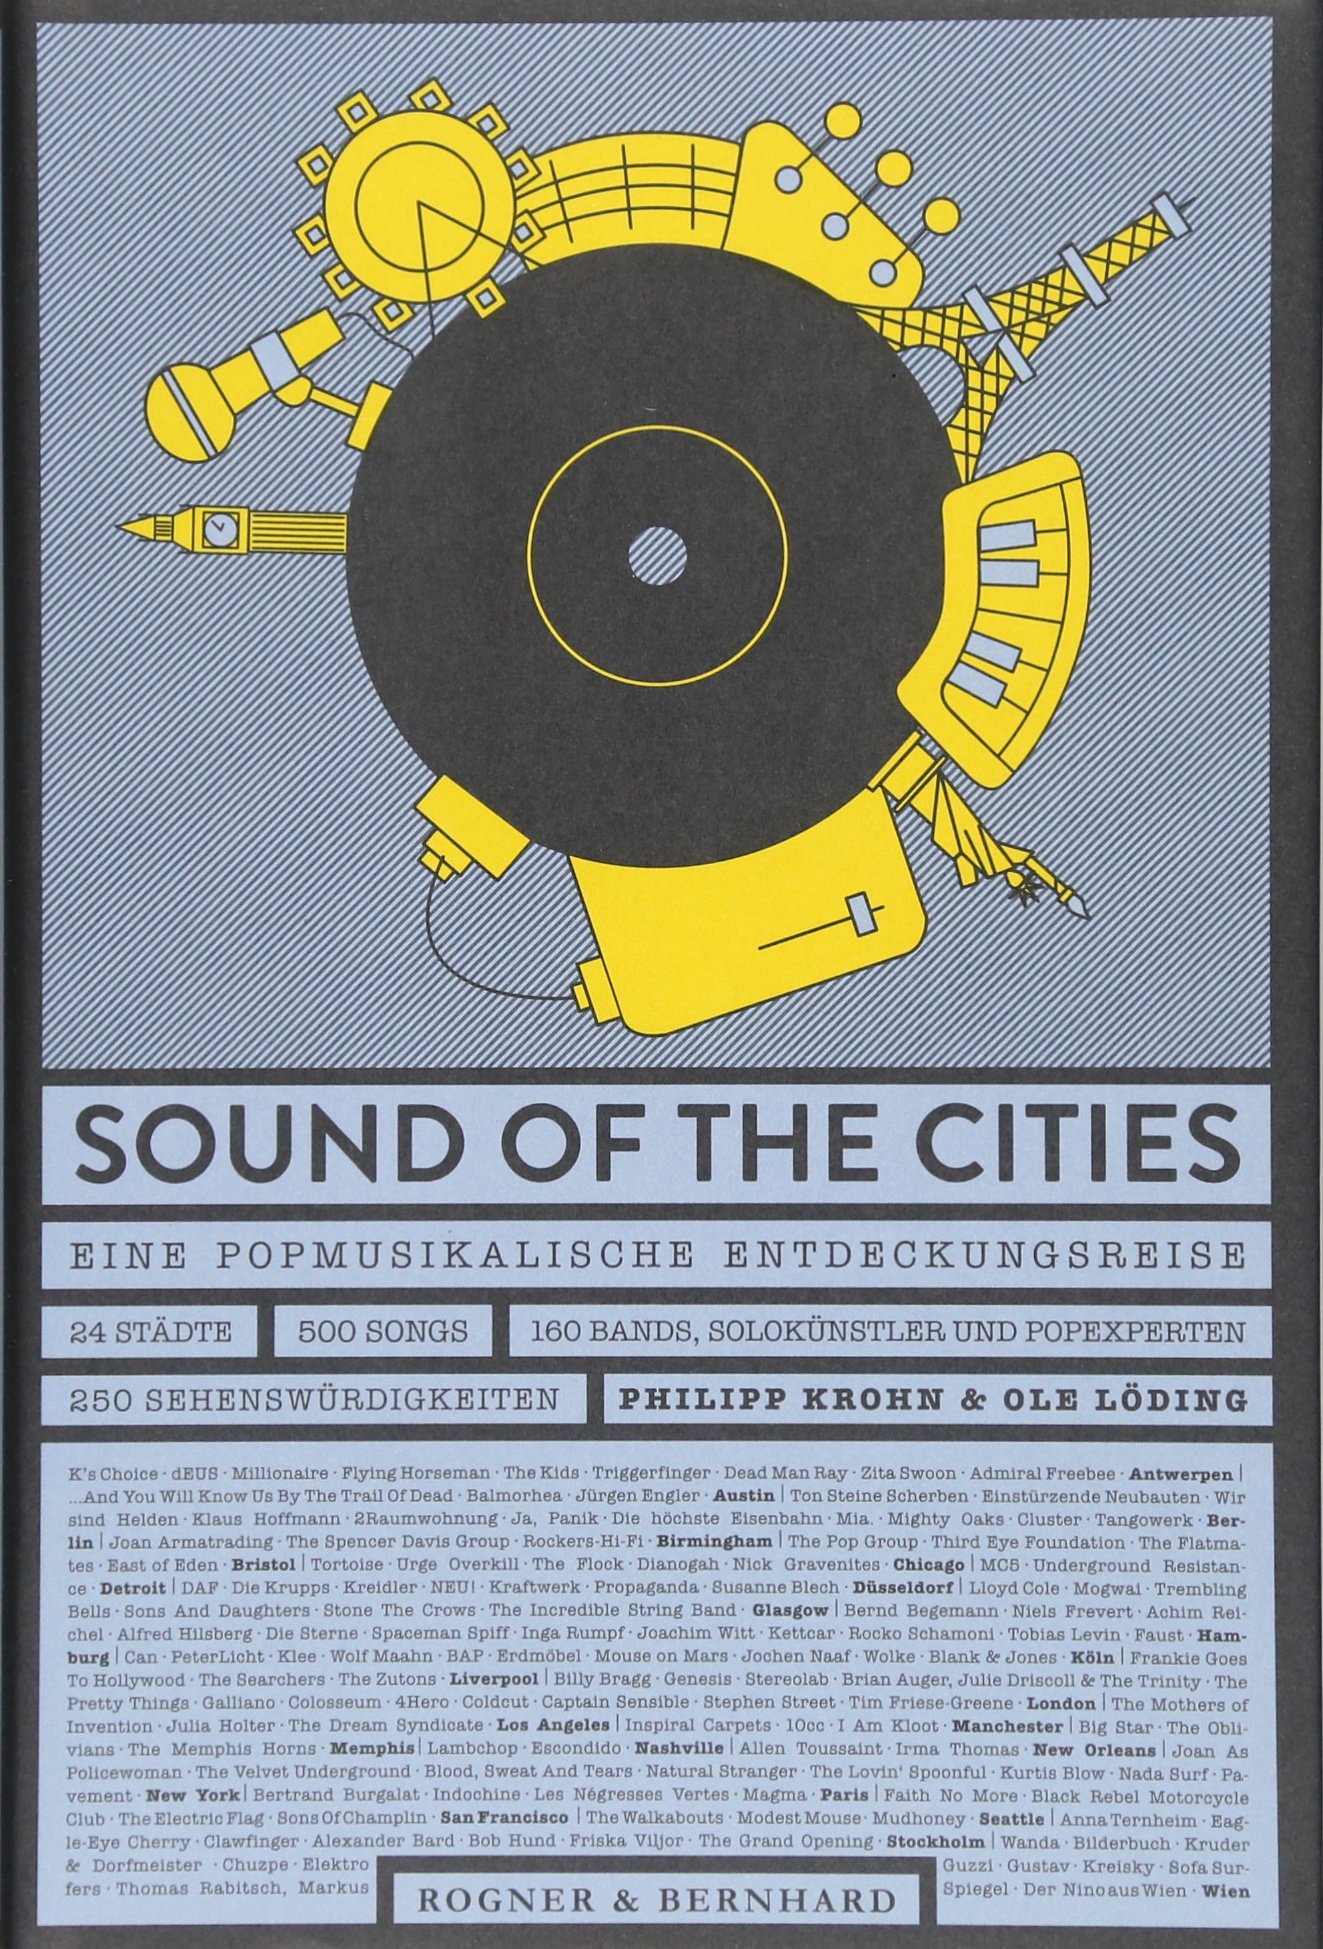 Sound of the cities